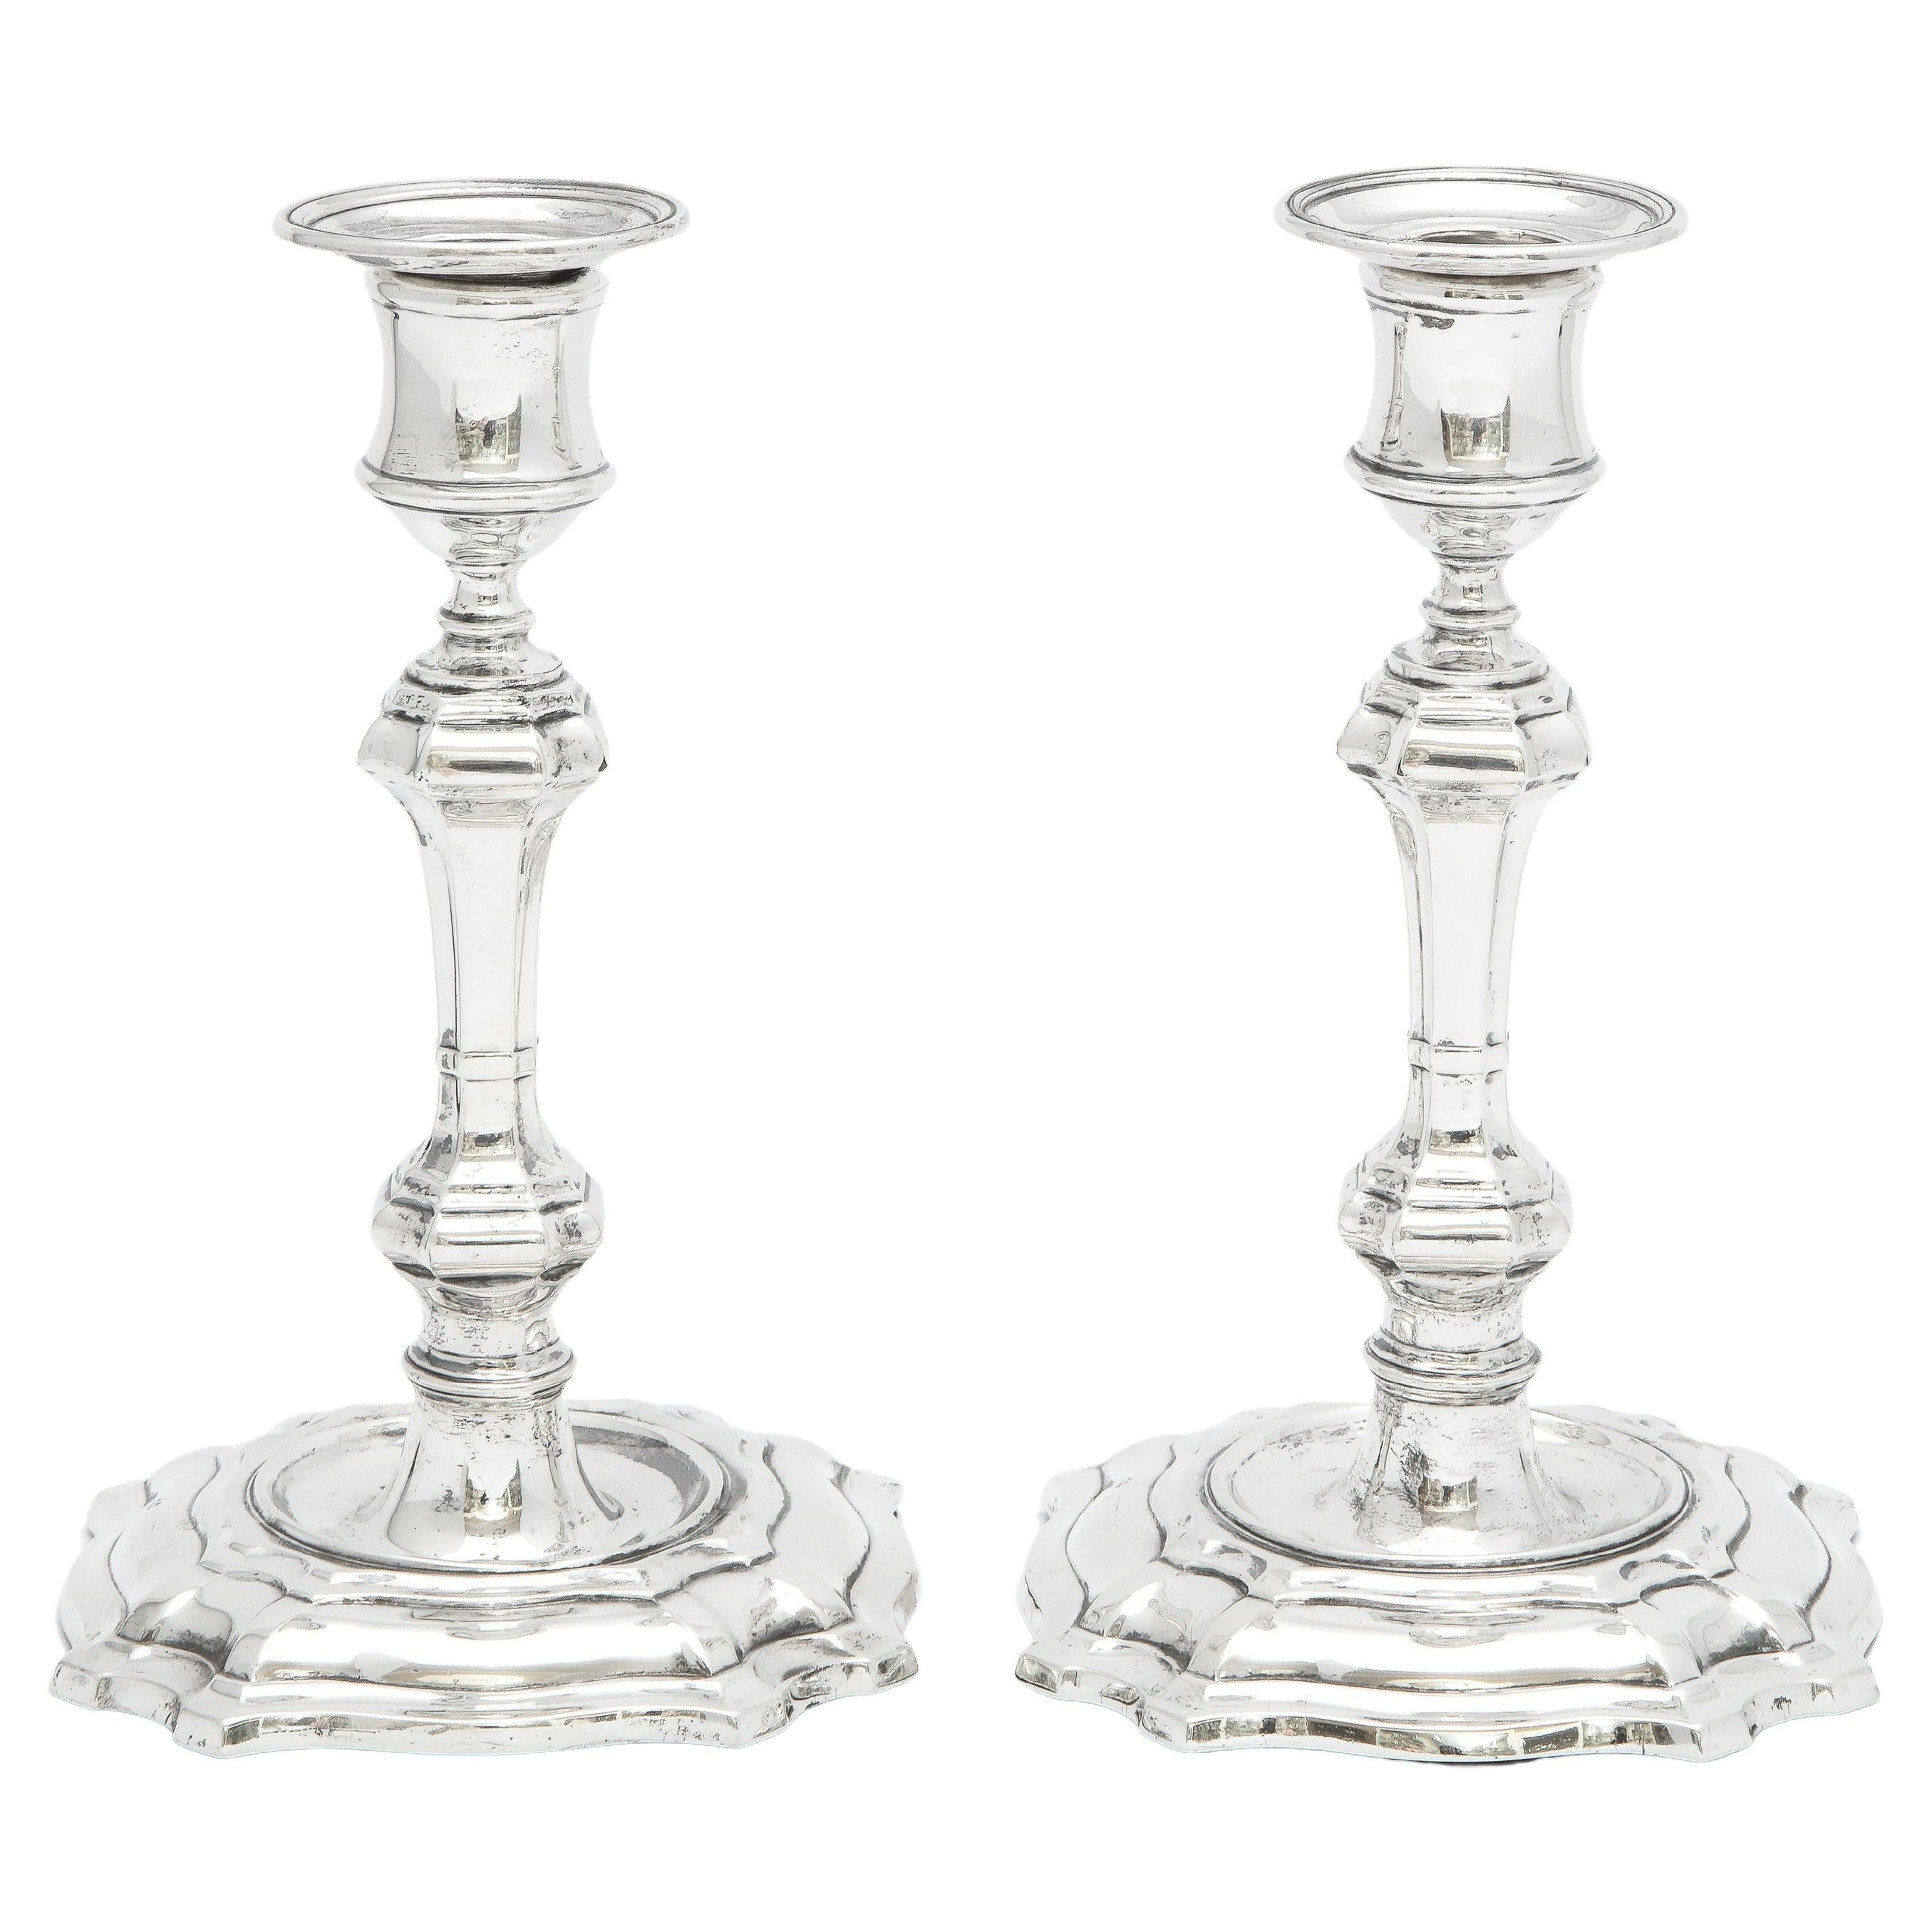 Pair of Georgian-Style Sterling Silver Candlesticks by William Hutton & Sons